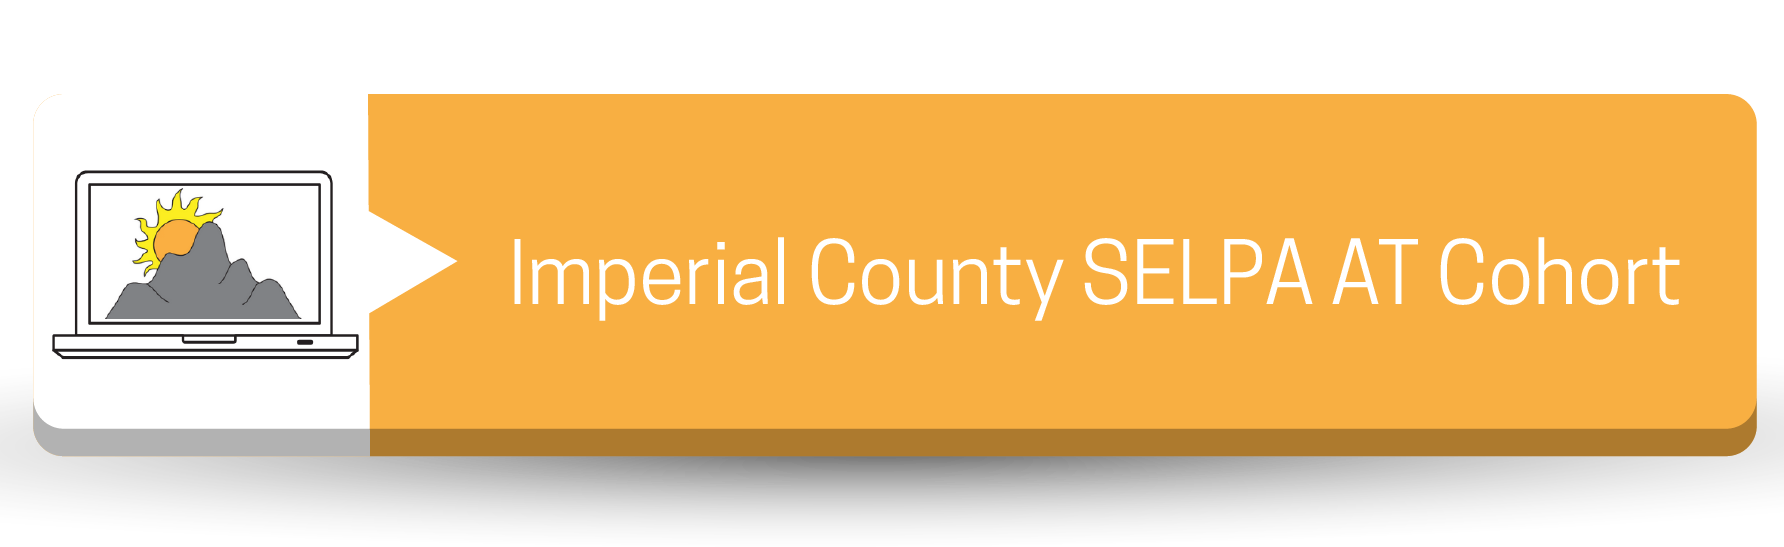 Imperial County SELPA AT Cohort Button